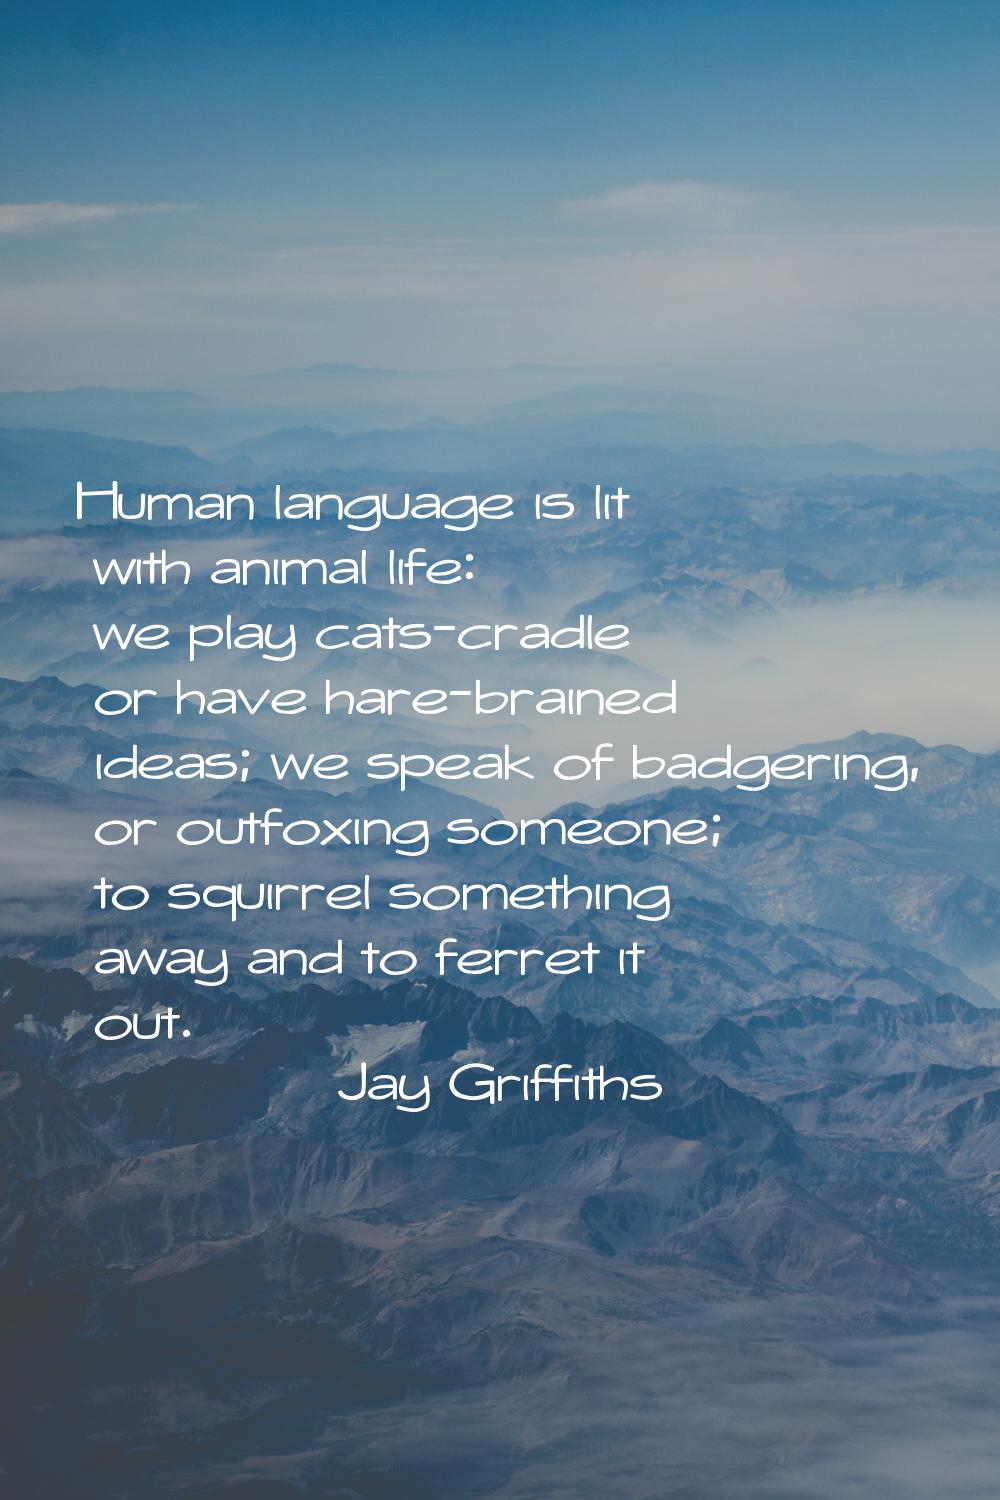 Human language is lit with animal life: we play cats-cradle or have hare-brained ideas; we speak of